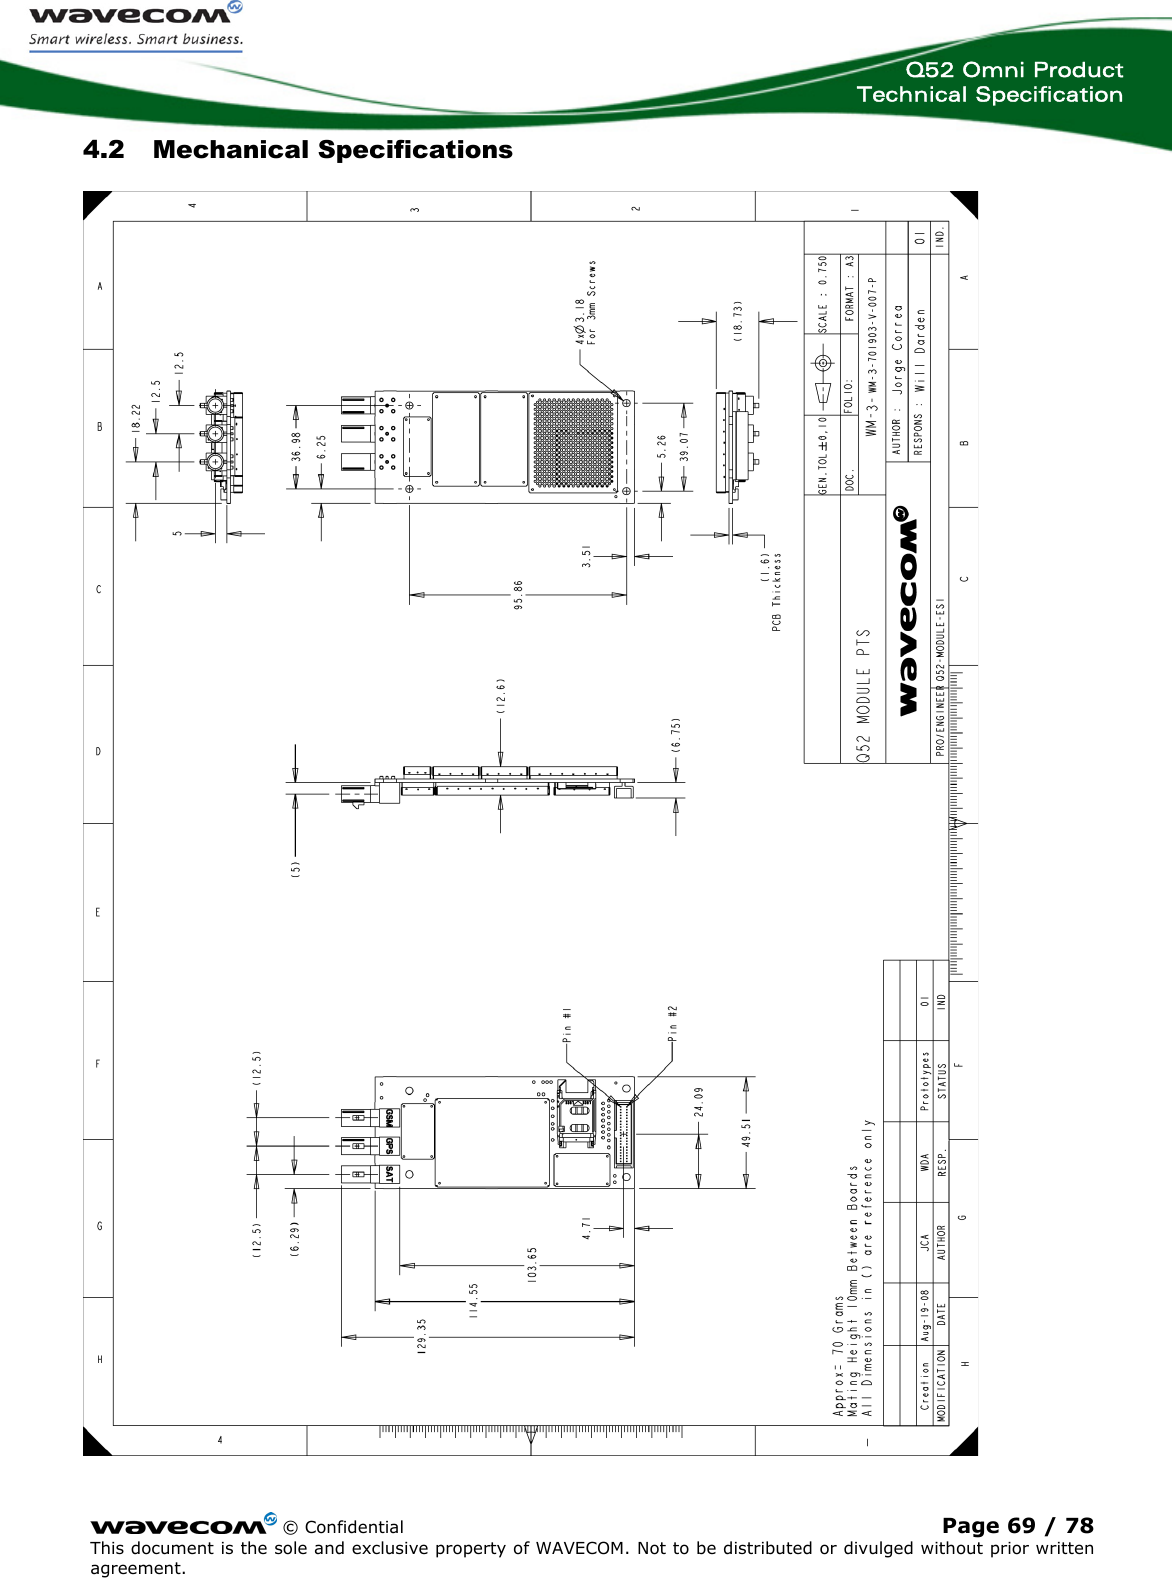  Q52 Omni Product Technical Specification   4.2 Mechanical Specifications   © Confidential Page 69 / 78 This document is the sole and exclusive property of WAVECOM. Not to be distributed or divulged without prior written agreement.  